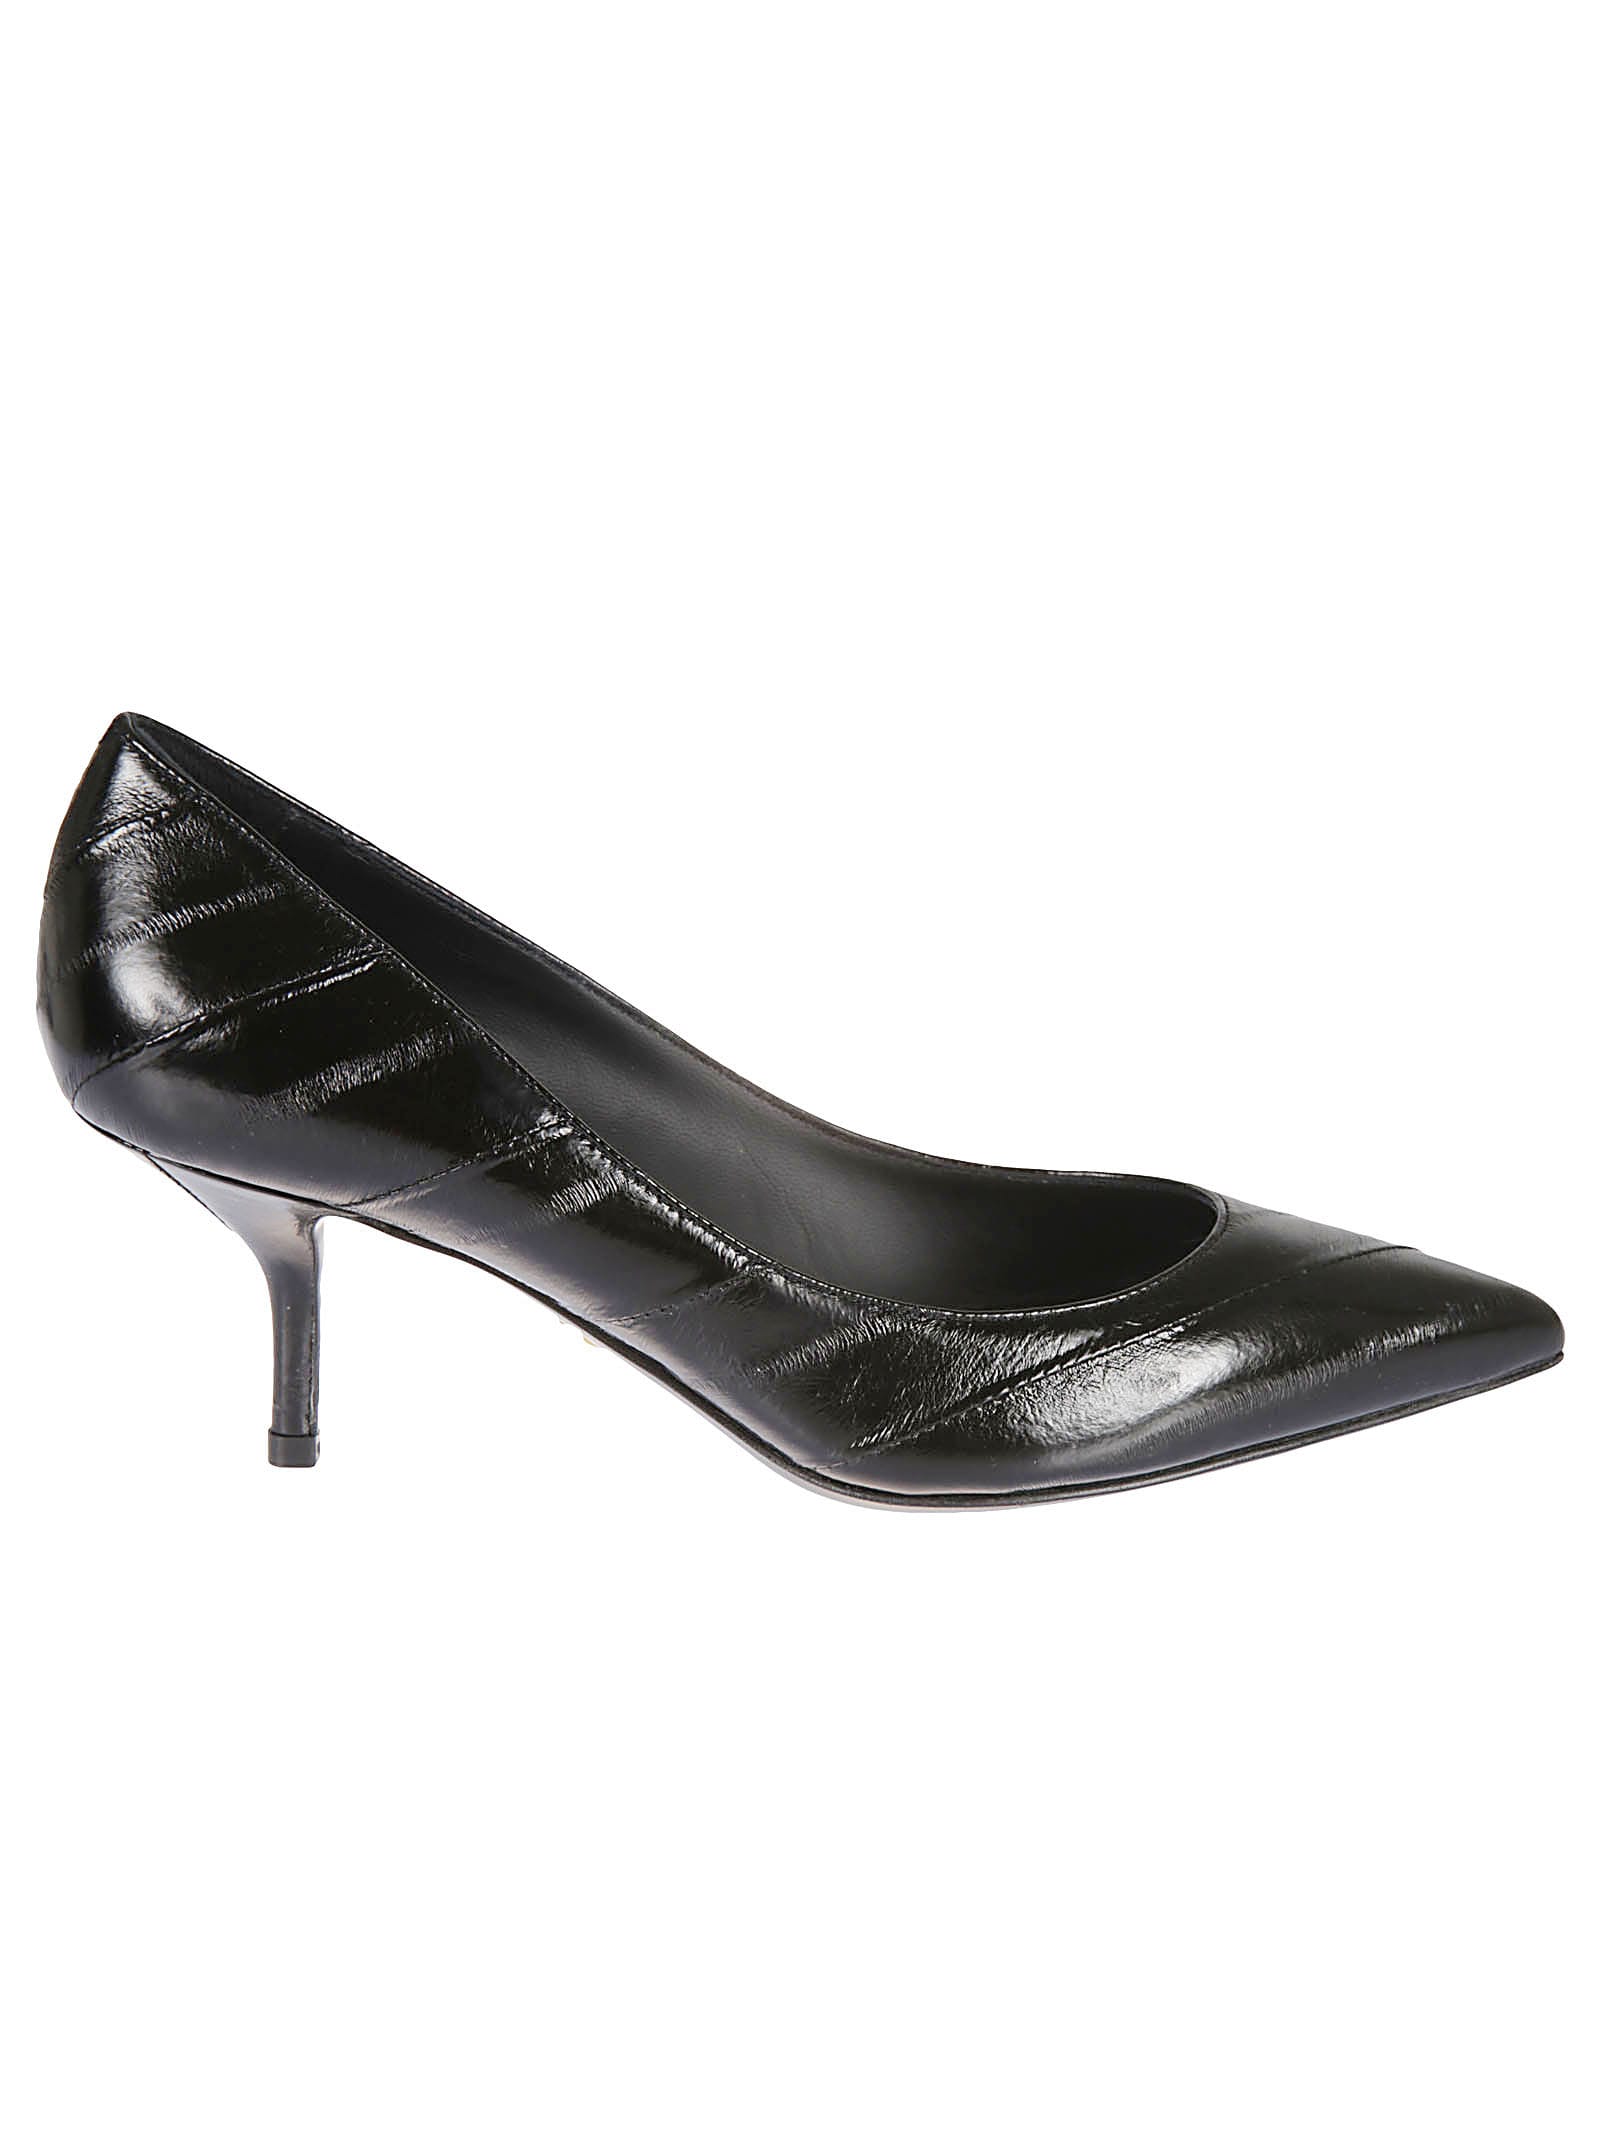 Buy Dolce & Gabbana Pointed-toe Leather Pumps online, shop Dolce & Gabbana shoes with free shipping